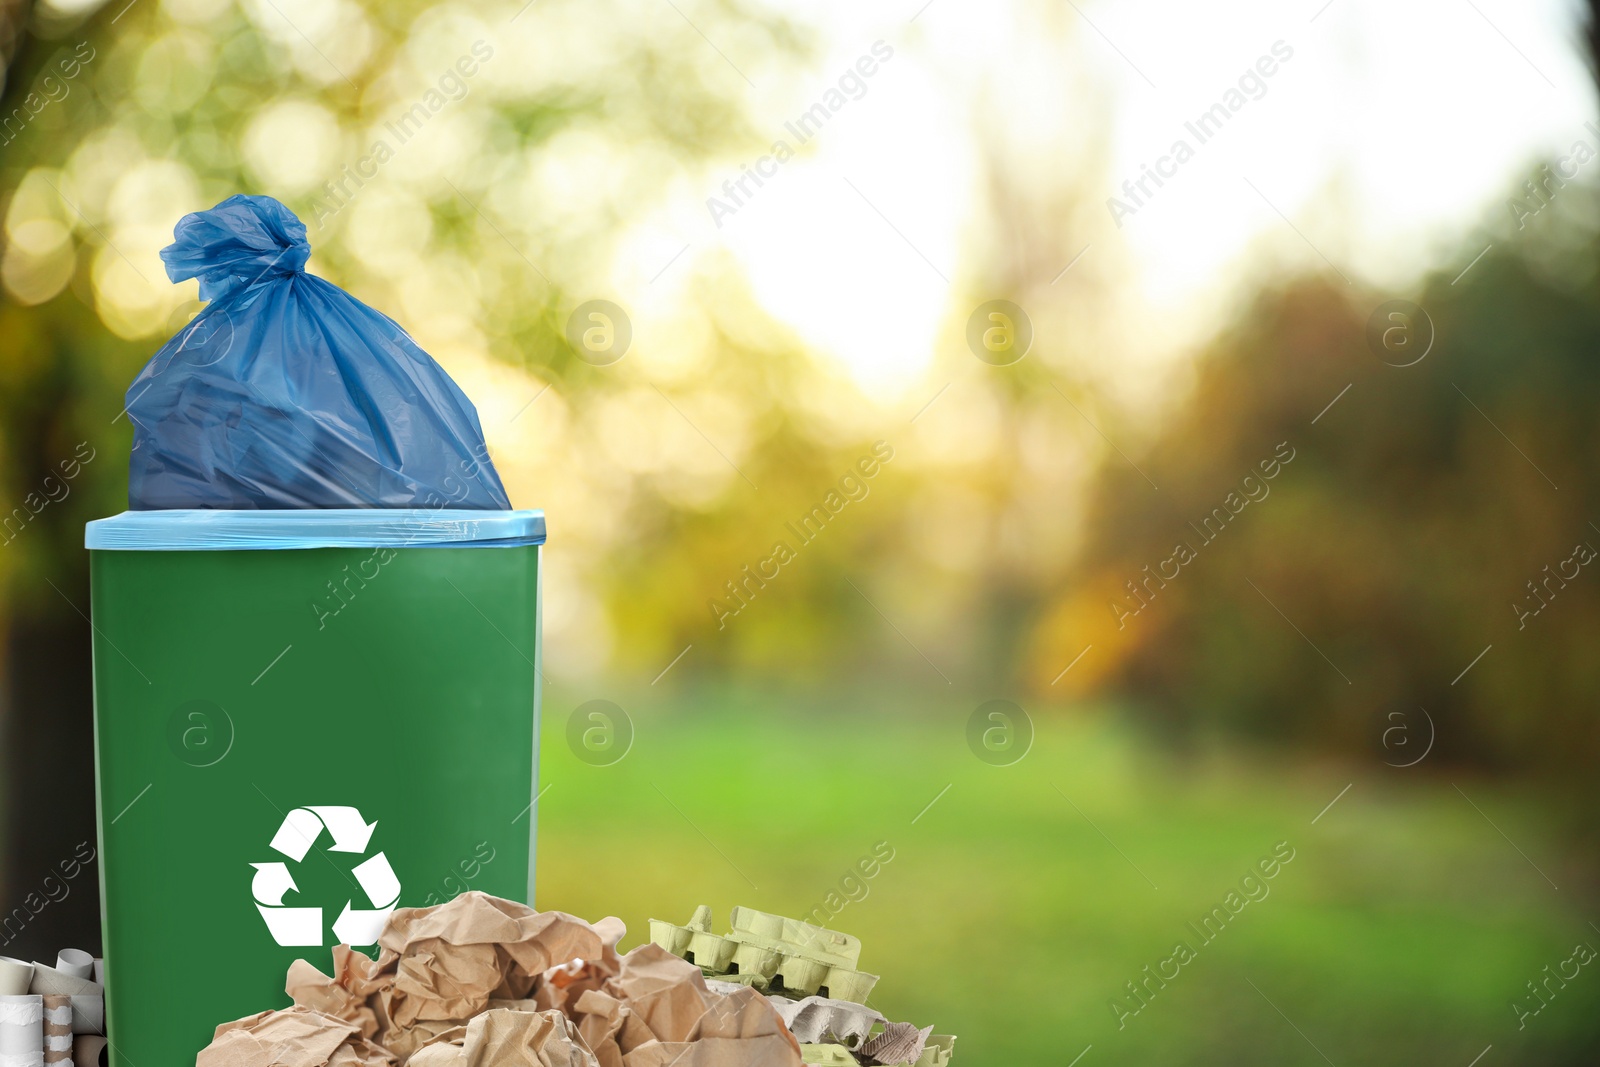 Image of Waste bin with plastic bag full of garbage surrounded by garbage outdoors, space for text